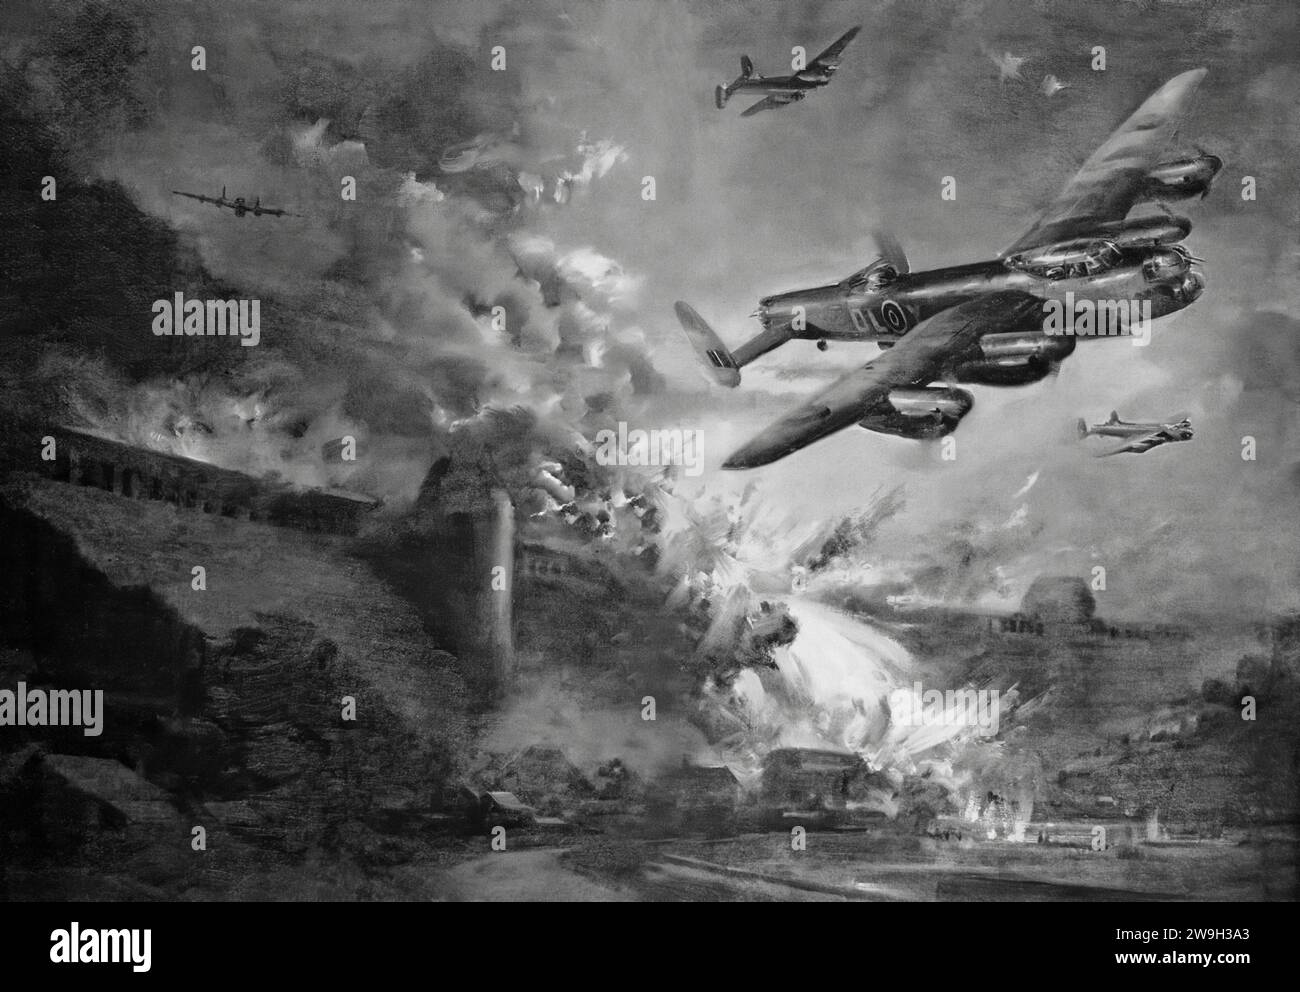 Avro Lancaster Bombers, aka The Dambusters, attacking a German Dam during Operation Chastise (May 16–17, 1943). During the raid by 617 Squadron RAF Bomber Command, used special 'bouncing bombs' developed by Sir Barnes Wallis to destroy the Möhne and Edersee hydroelectric dams in the industrialised Ruhr Valley that were vital to Germany’s production of war material. Stock Photo